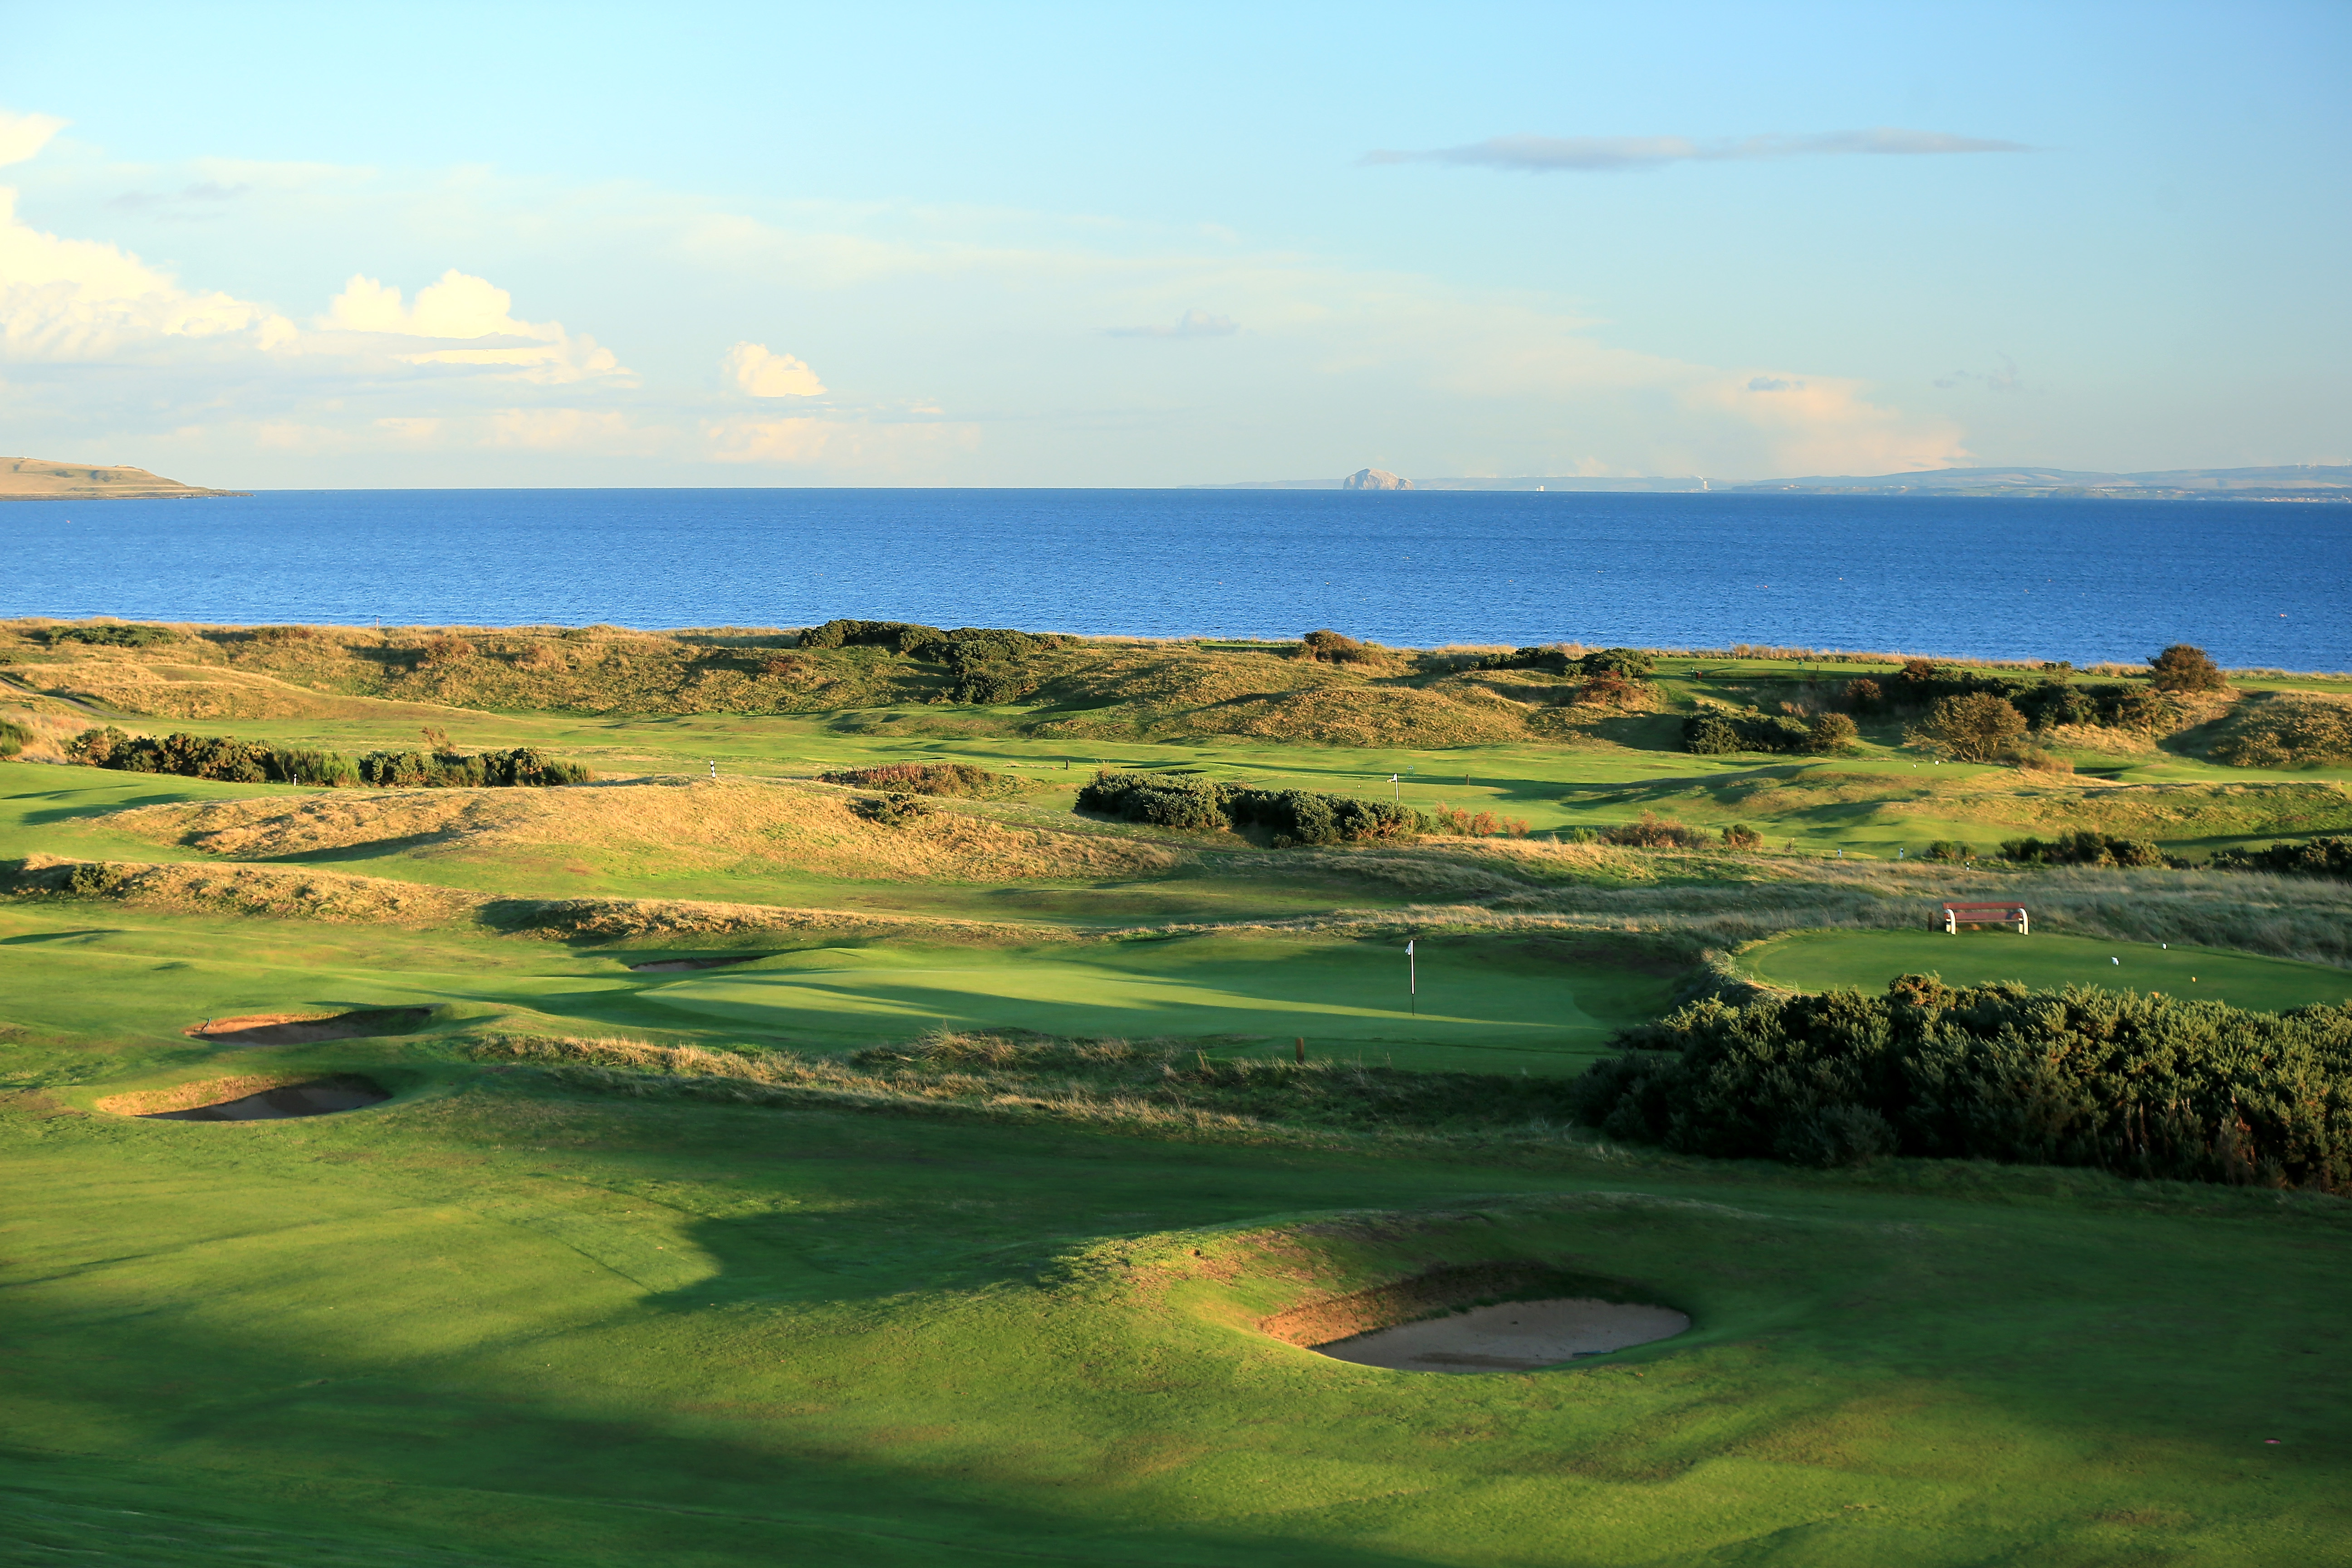 Stunning views are on show throughout the round (Photo: Getty Images)